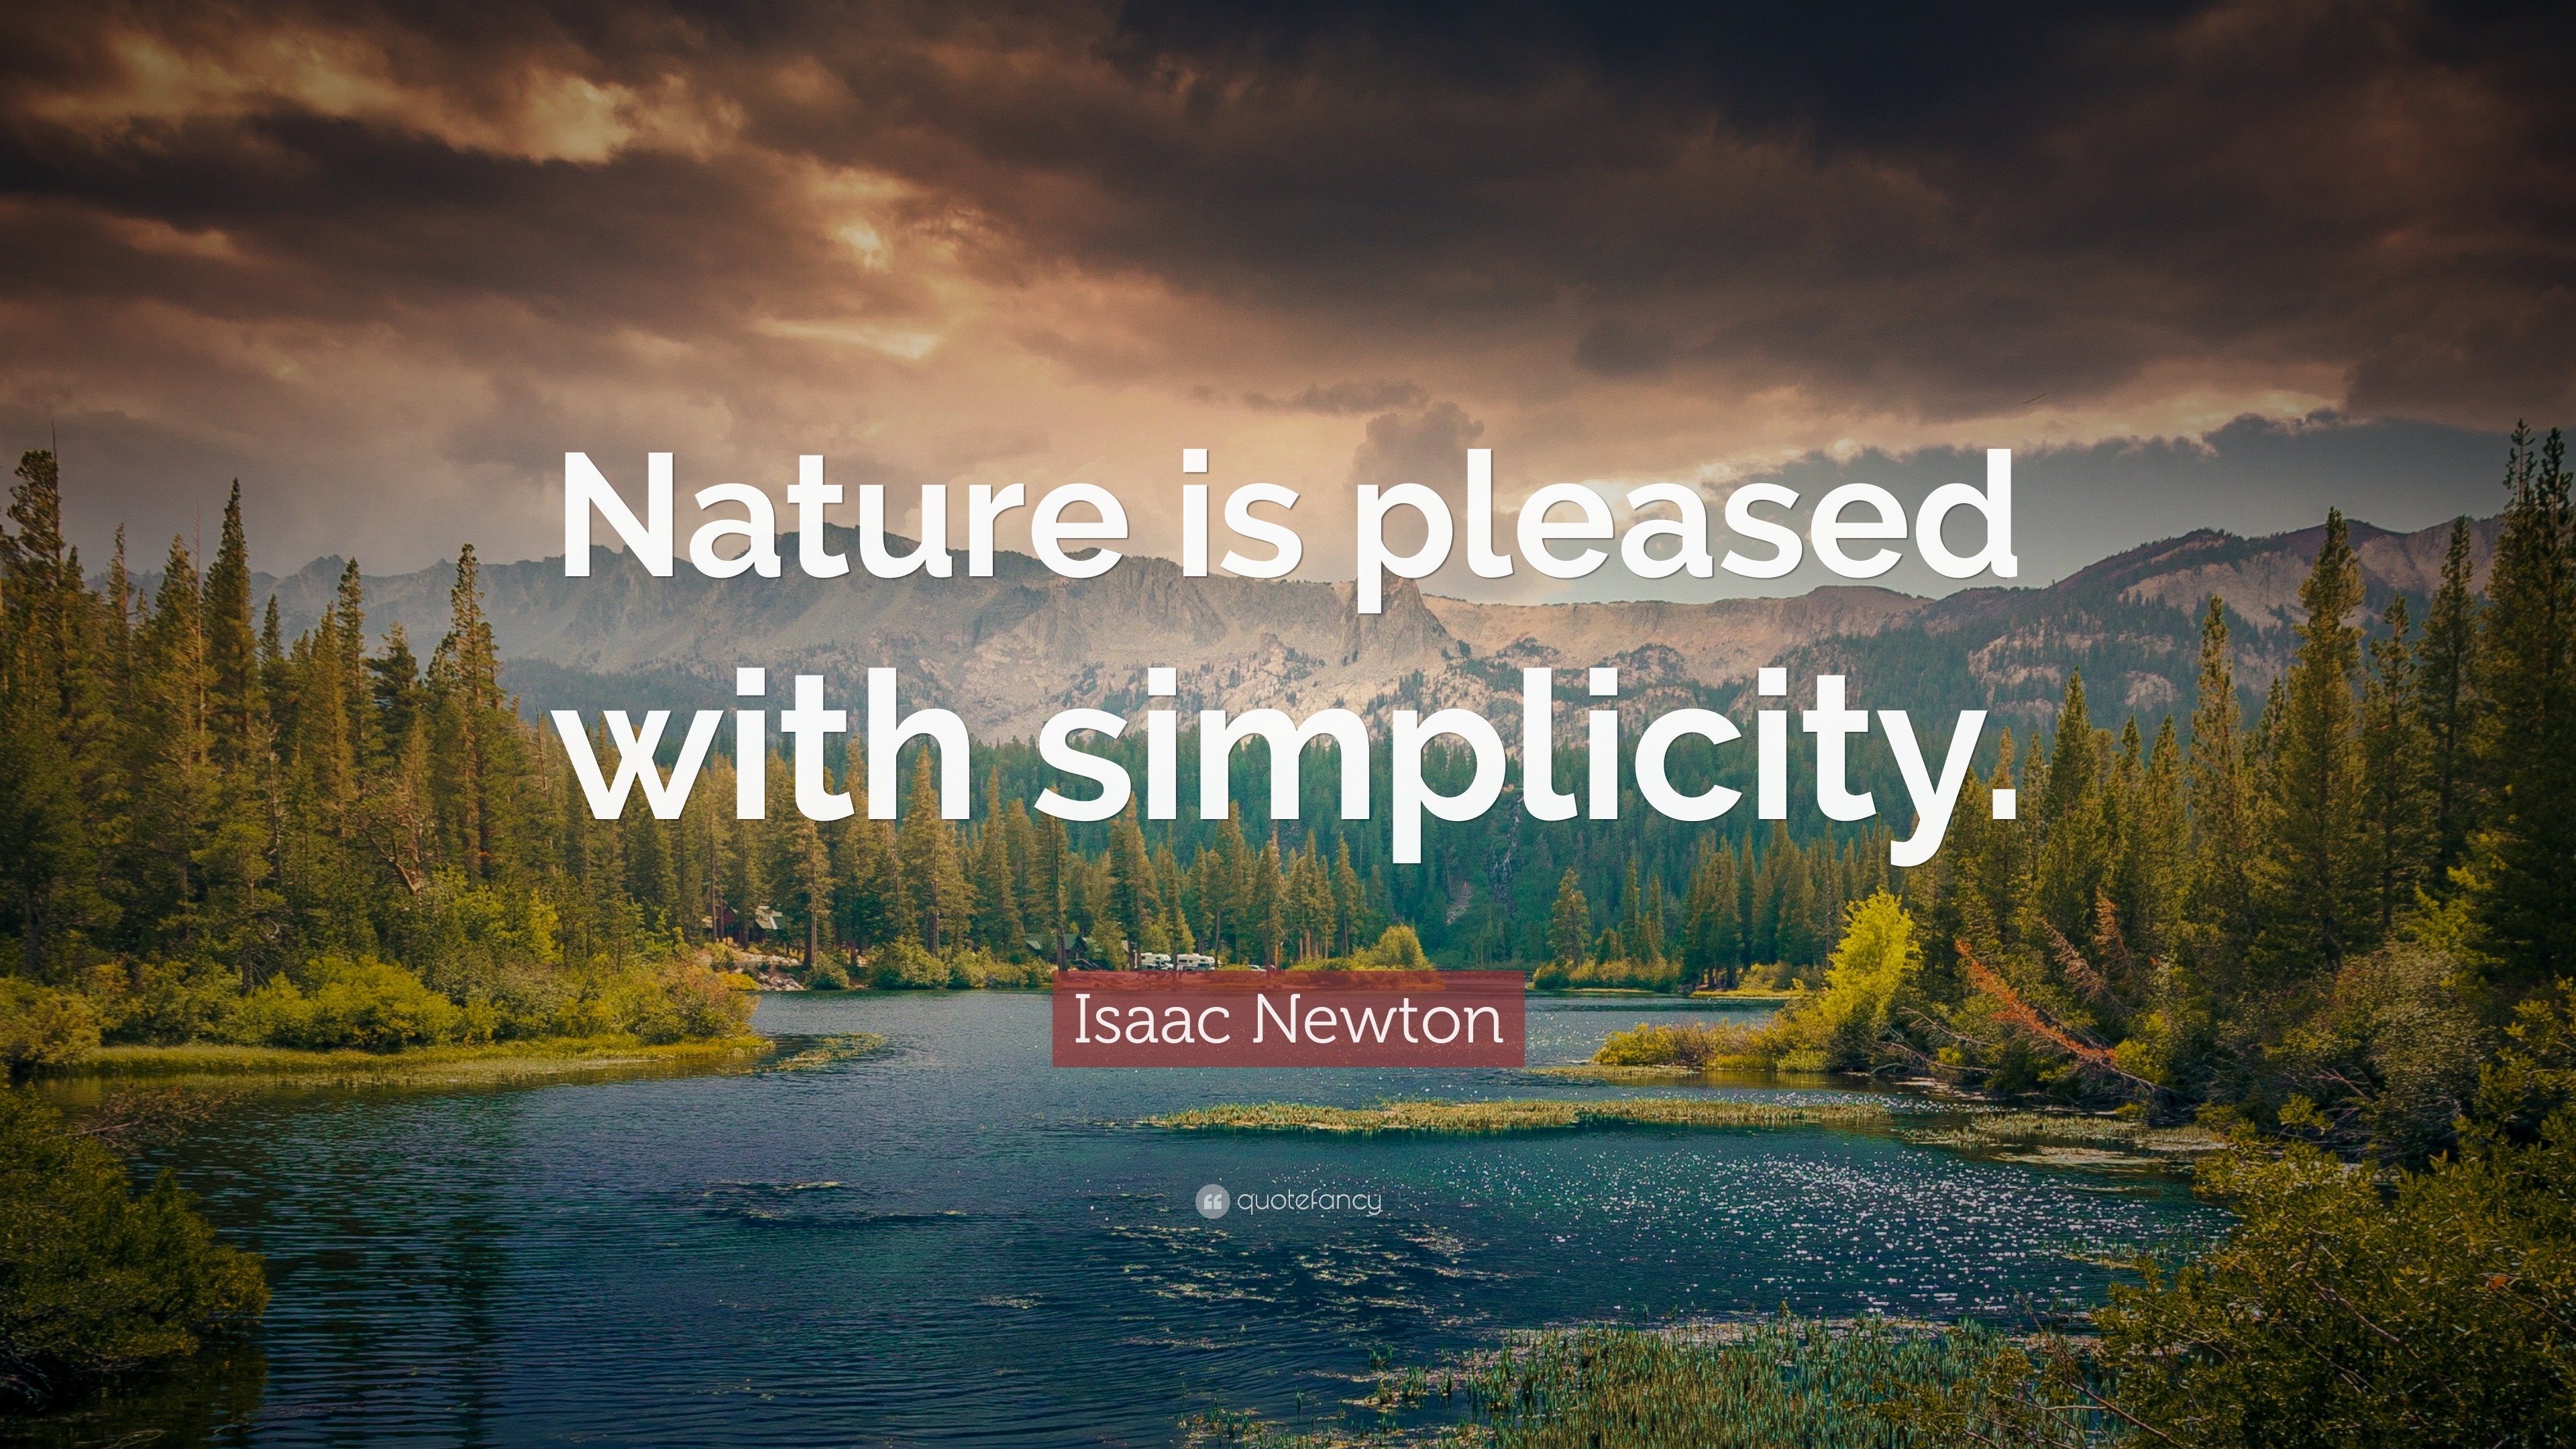 fra nu af Spekulerer Staple Isaac Newton Quote: “Nature is pleased with simplicity.”